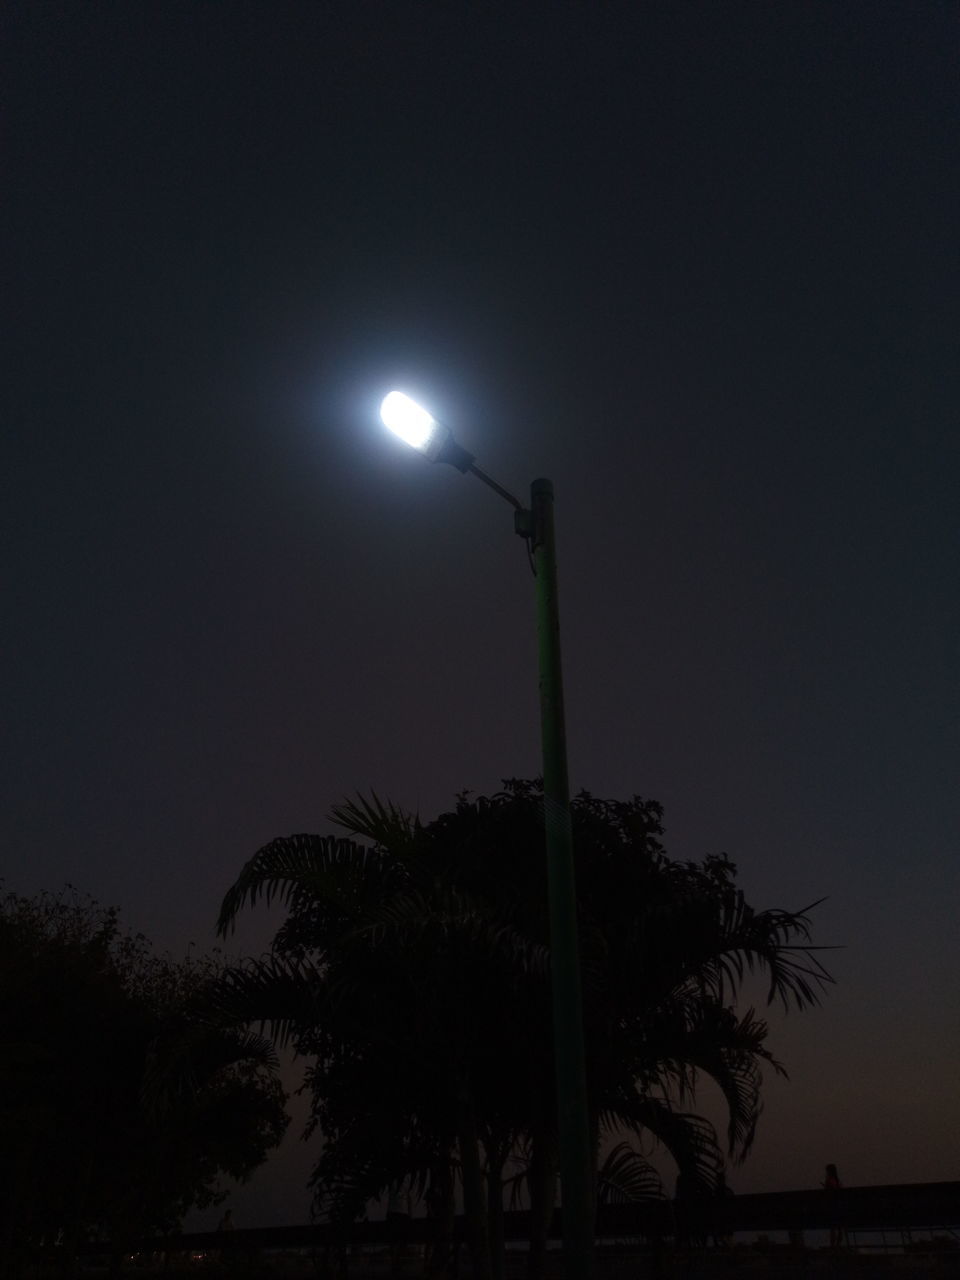 night, moon, street light, sky, tree, darkness, moonlight, palm tree, plant, nature, no people, illuminated, light, lighting, full moon, silhouette, dusk, lighting equipment, low angle view, tropical climate, outdoors, dark, street, beauty in nature, tranquility, evening, astronomical object, copy space